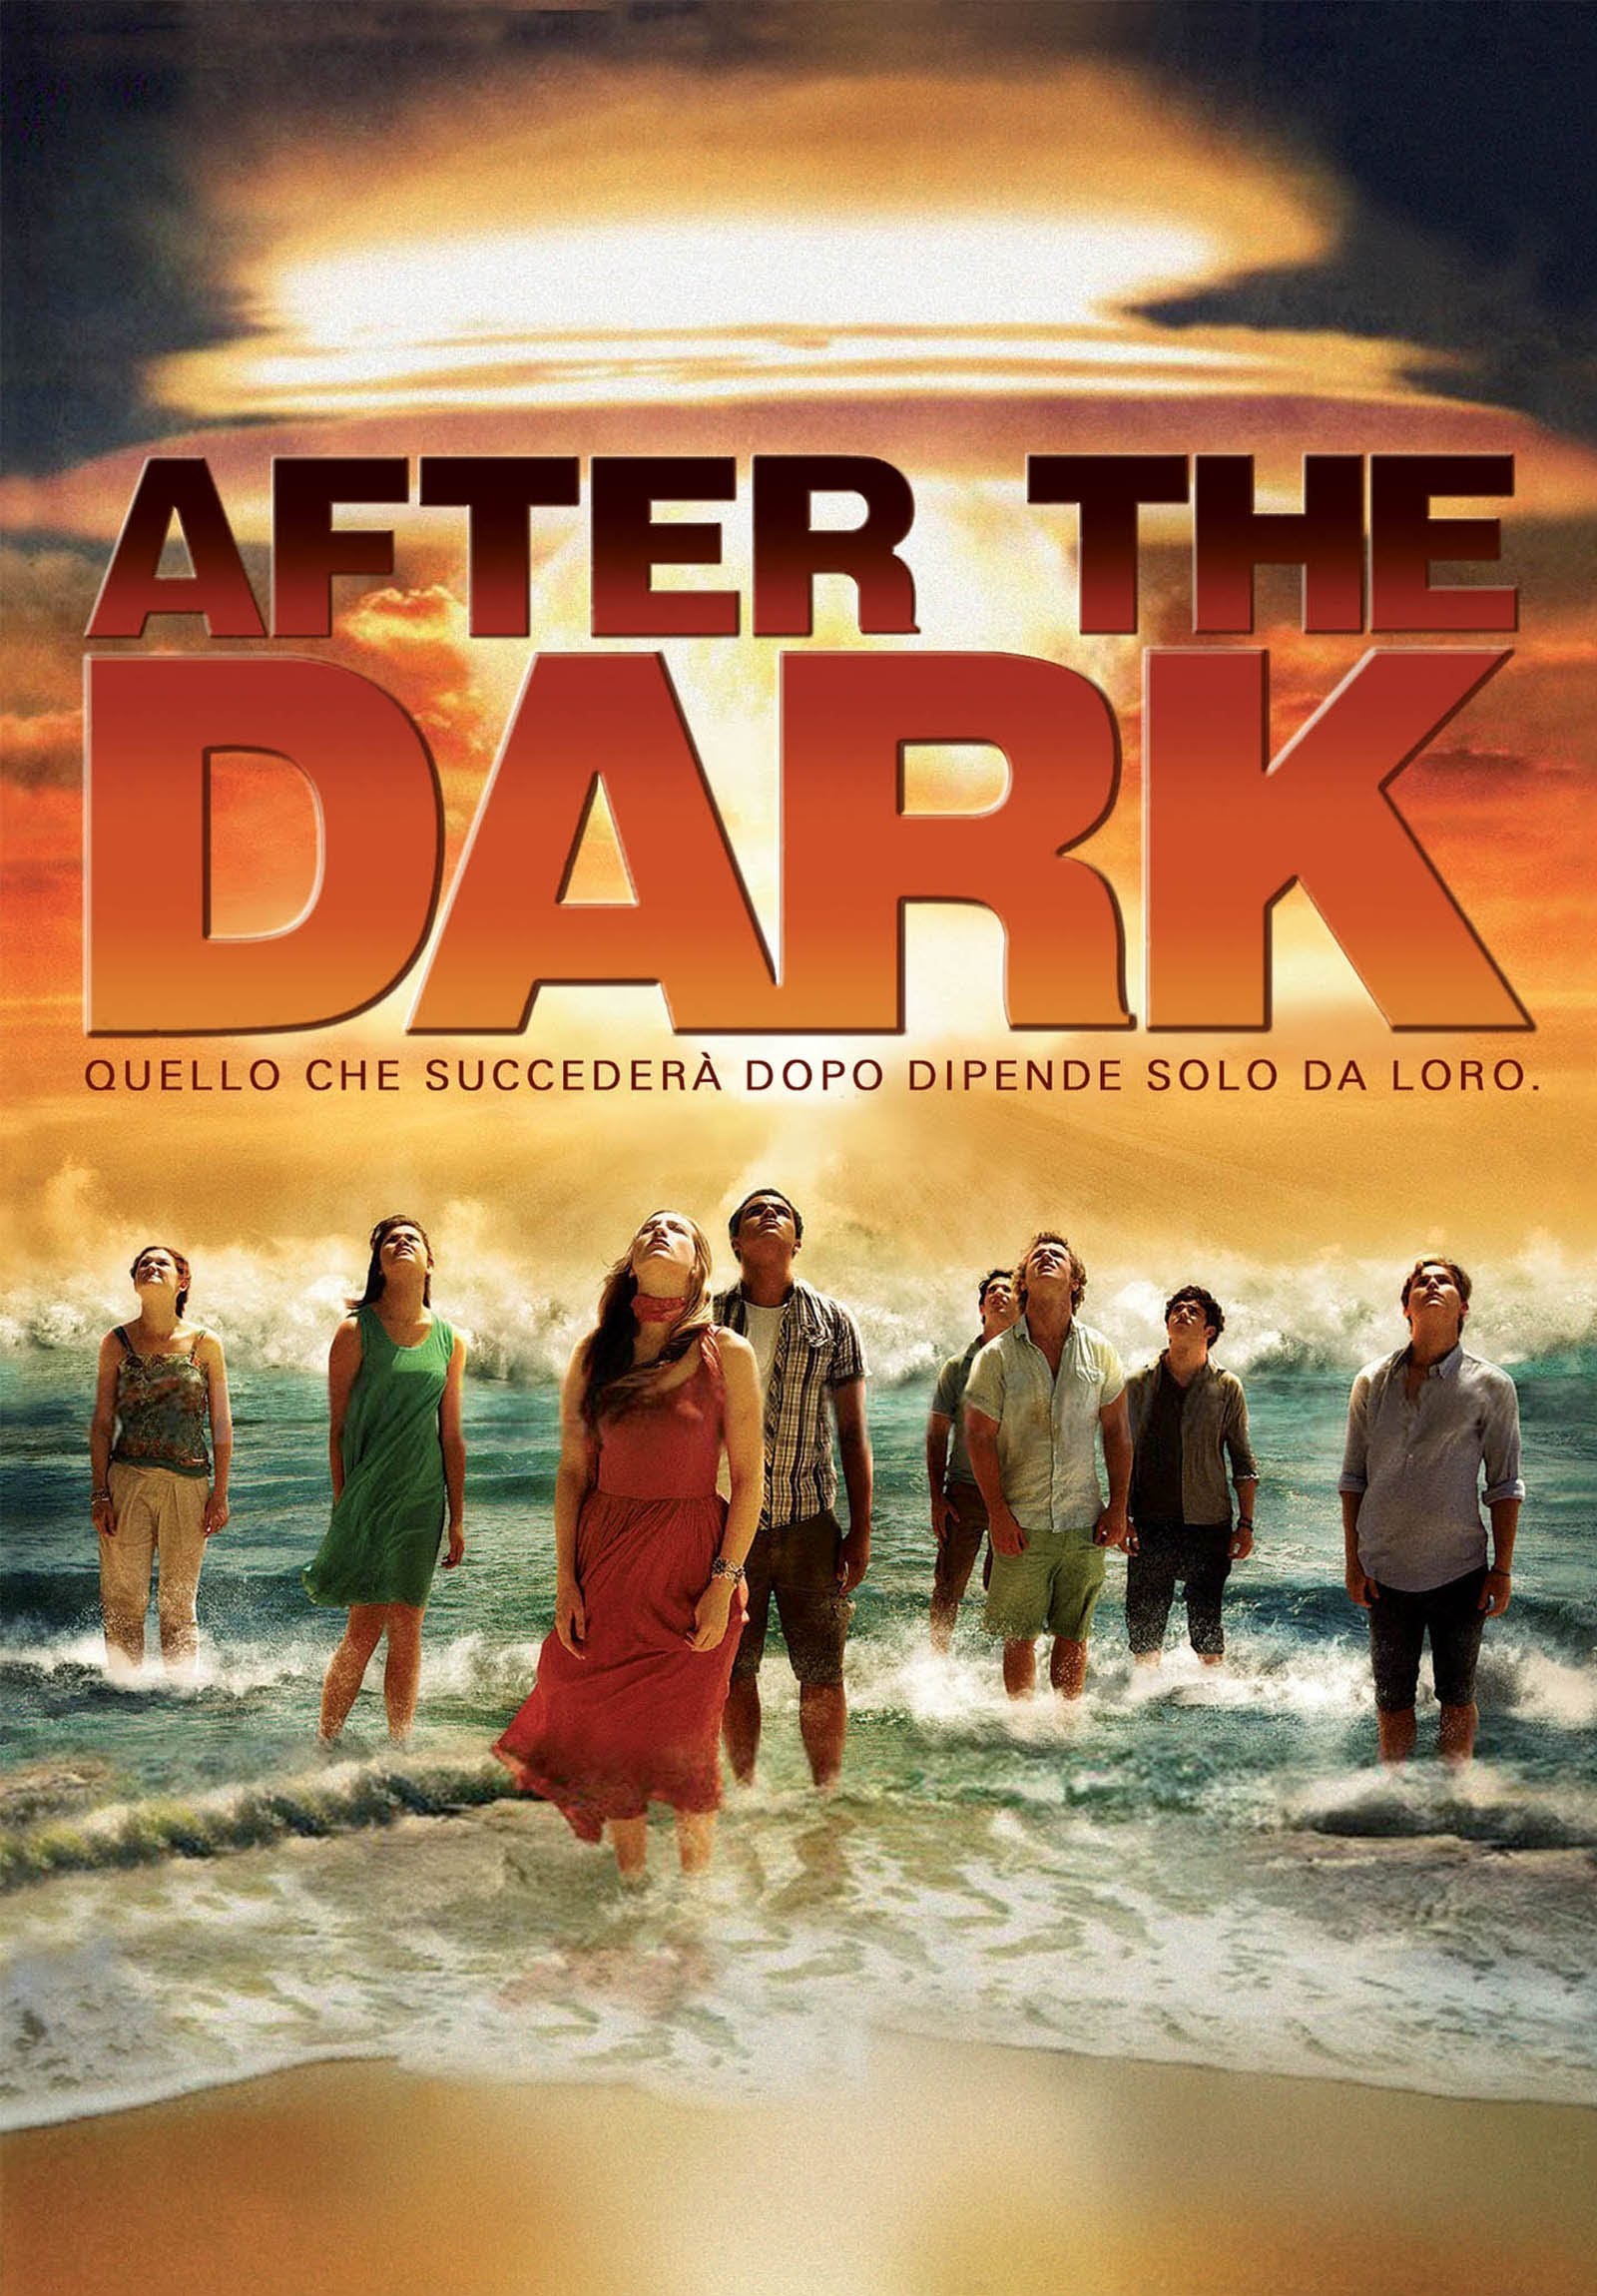 After the Dark [HD] (2013)